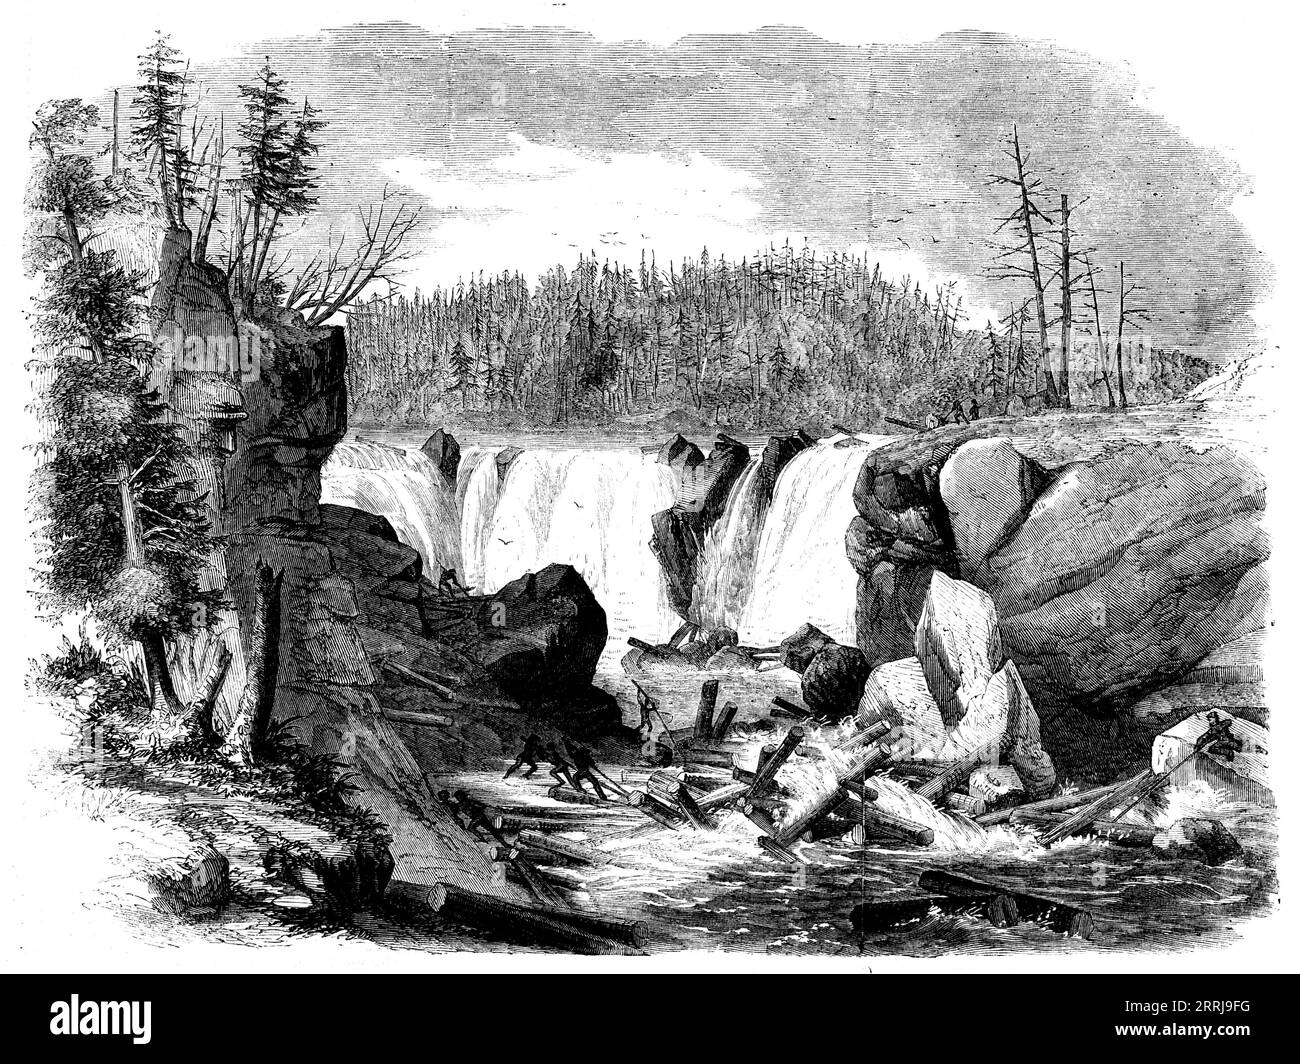 Lumbering in New Brunswick - Driving Logs down the Falls of the St. John, [Canada], 1858. 'The lumbering business is the leading element of wealth in the province; and the sawmills, which are found collected at the mouths of all its rivers, as well as the building of ships, and the business of transportation to the mother country, give employment to a very large proportion of the population...the forests...supply timber of large size, in any quantity, for building ships of the largest class...On the arrival of spring, when the heavy rains and the melting of the ice and snow have caused the str Stock Photo